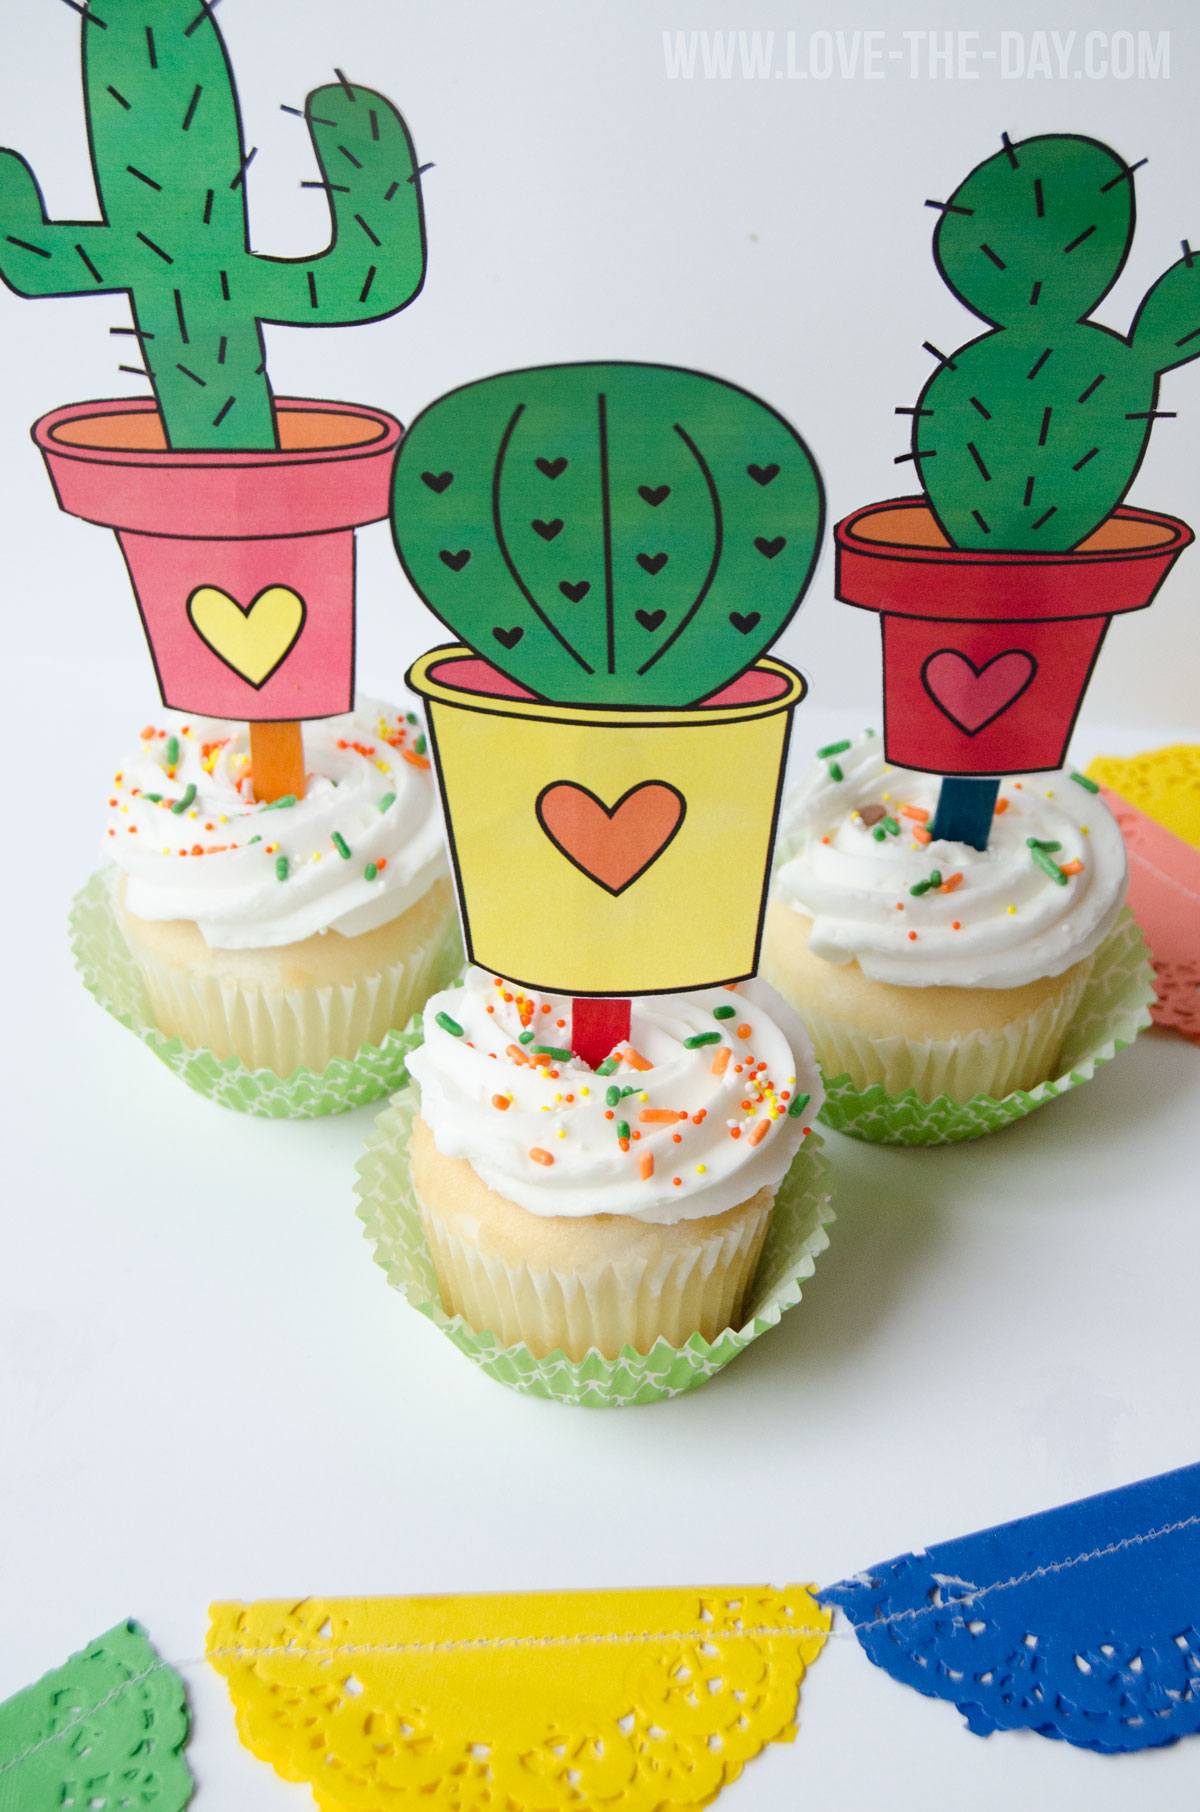 Cinco De Mayo Printables:: FREE Cactus Toppers by Love The Day